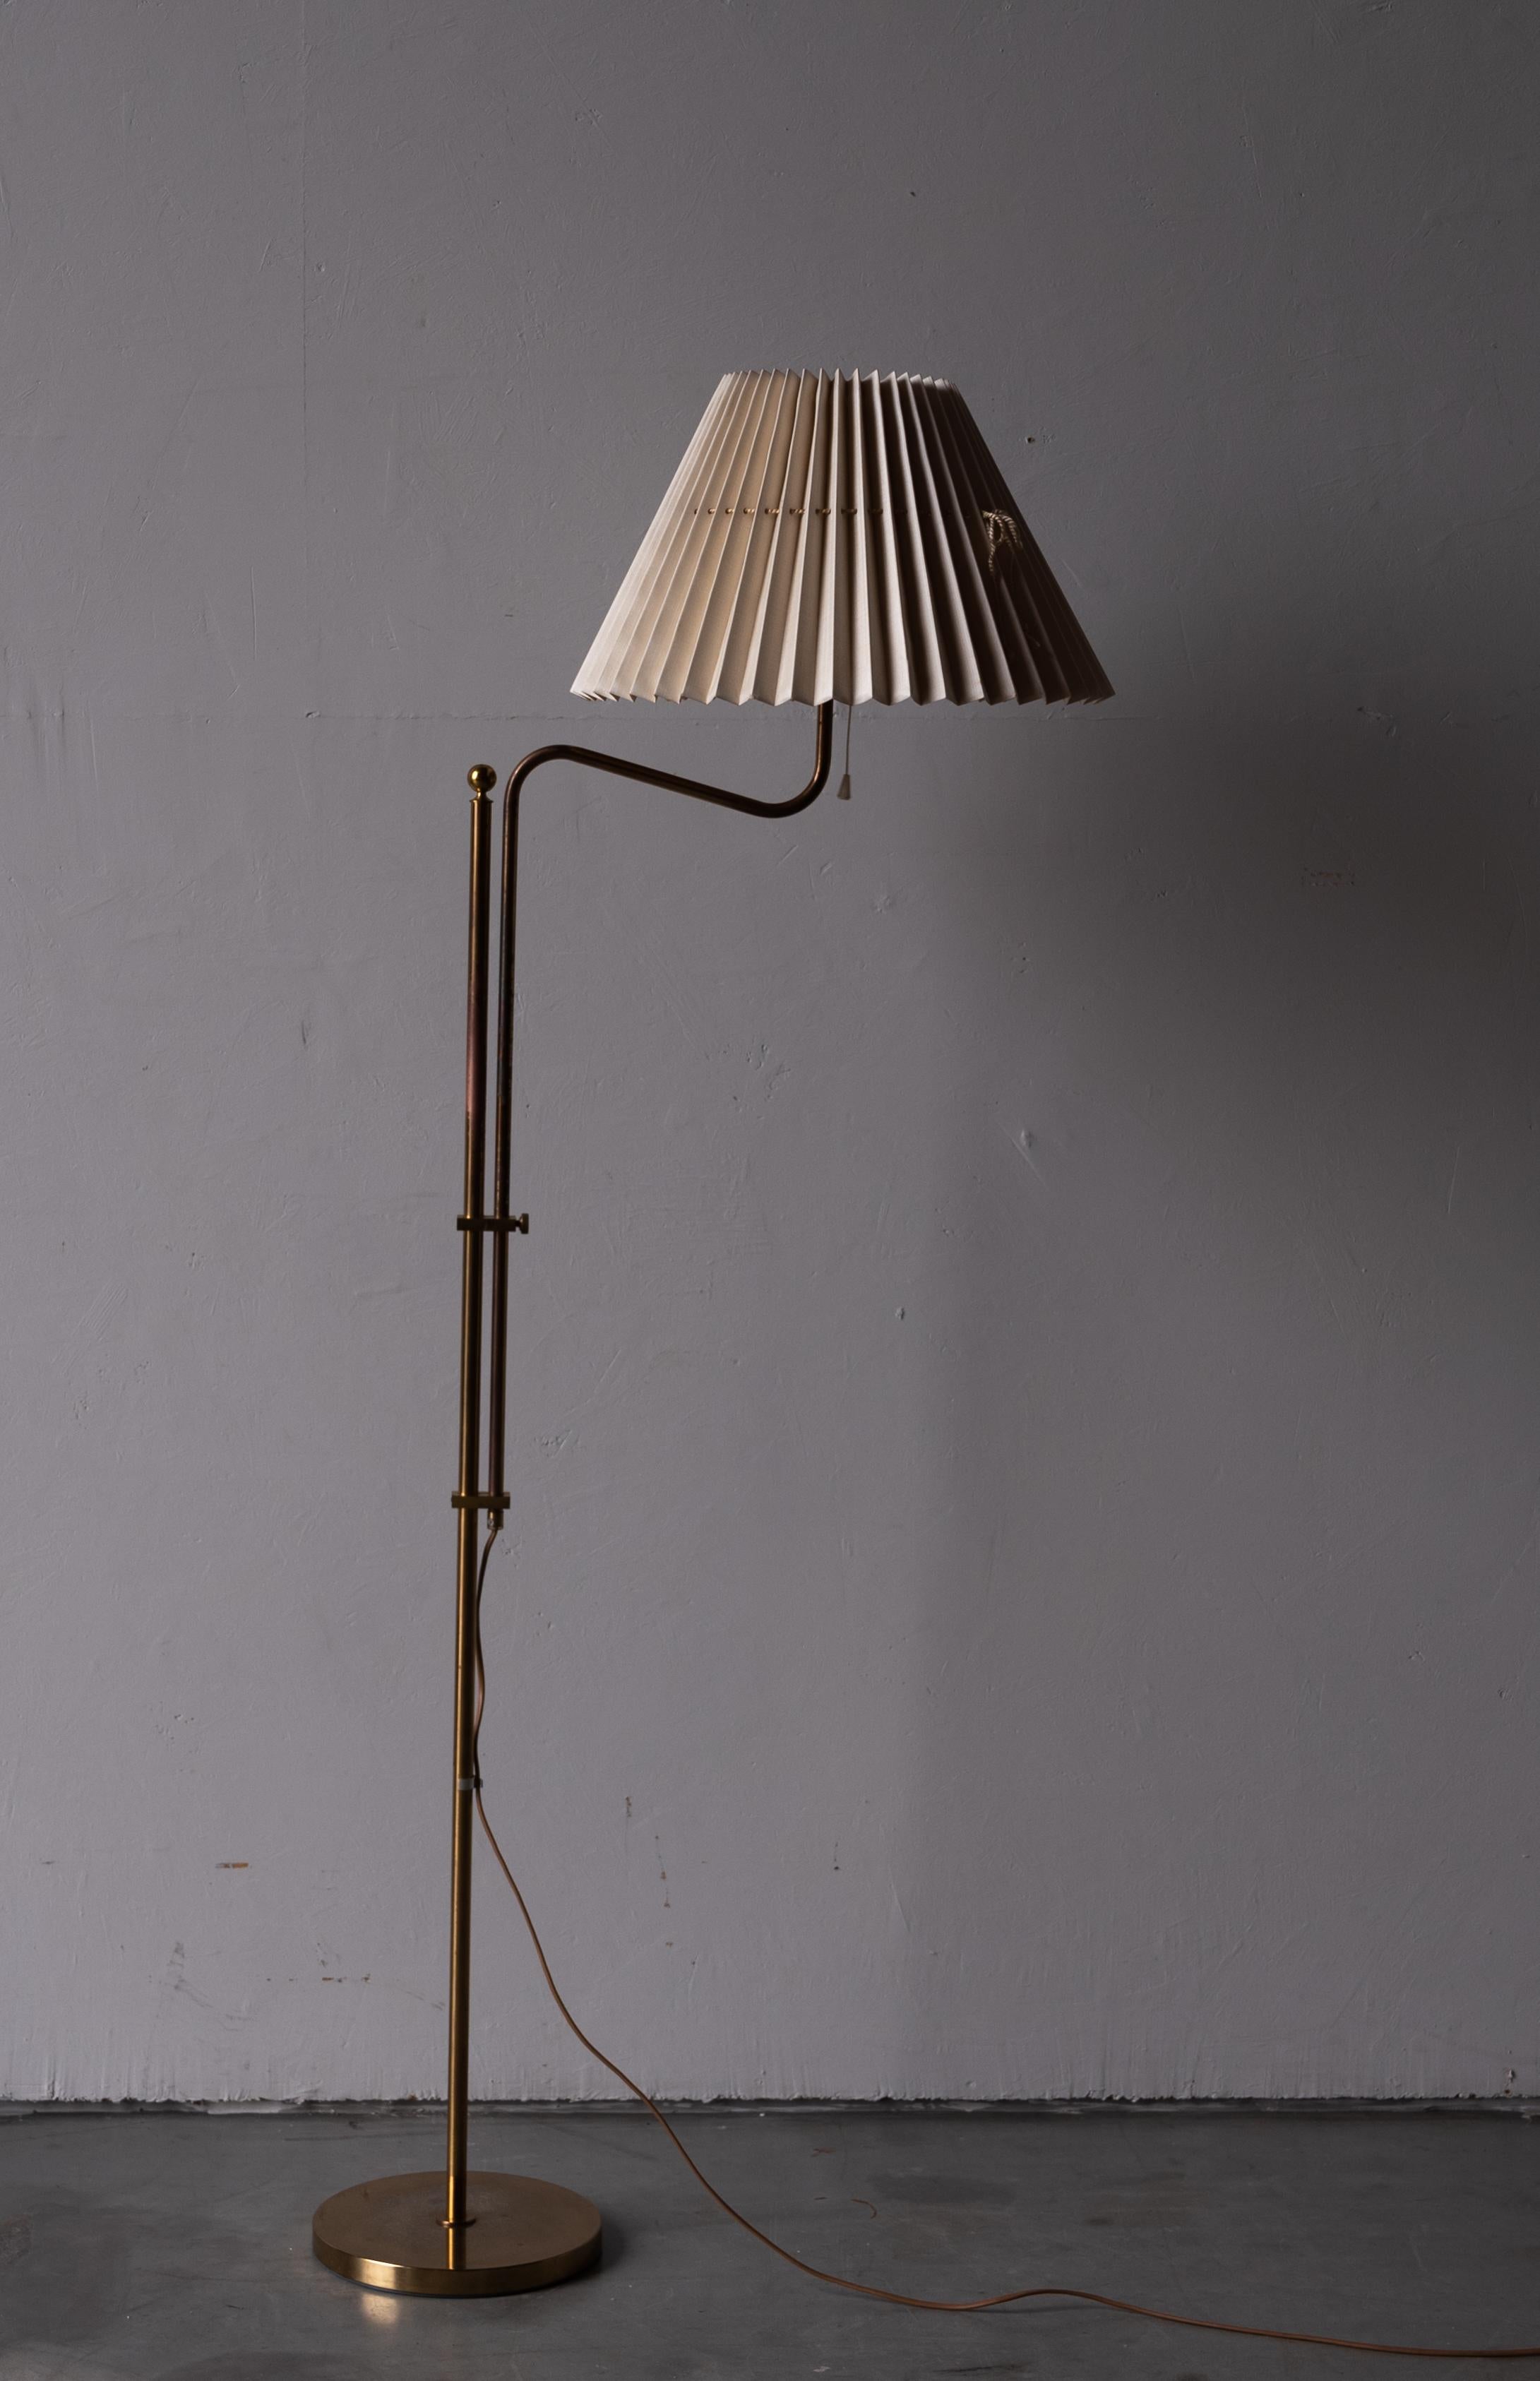 A floor lamp. Designed and produced by Bergboms, Sweden, c. 1970s. Original lampshade.

Other designers of the period include Paavo Tynell, Hans Bergström, Josef Frank, and Kaare Klint.